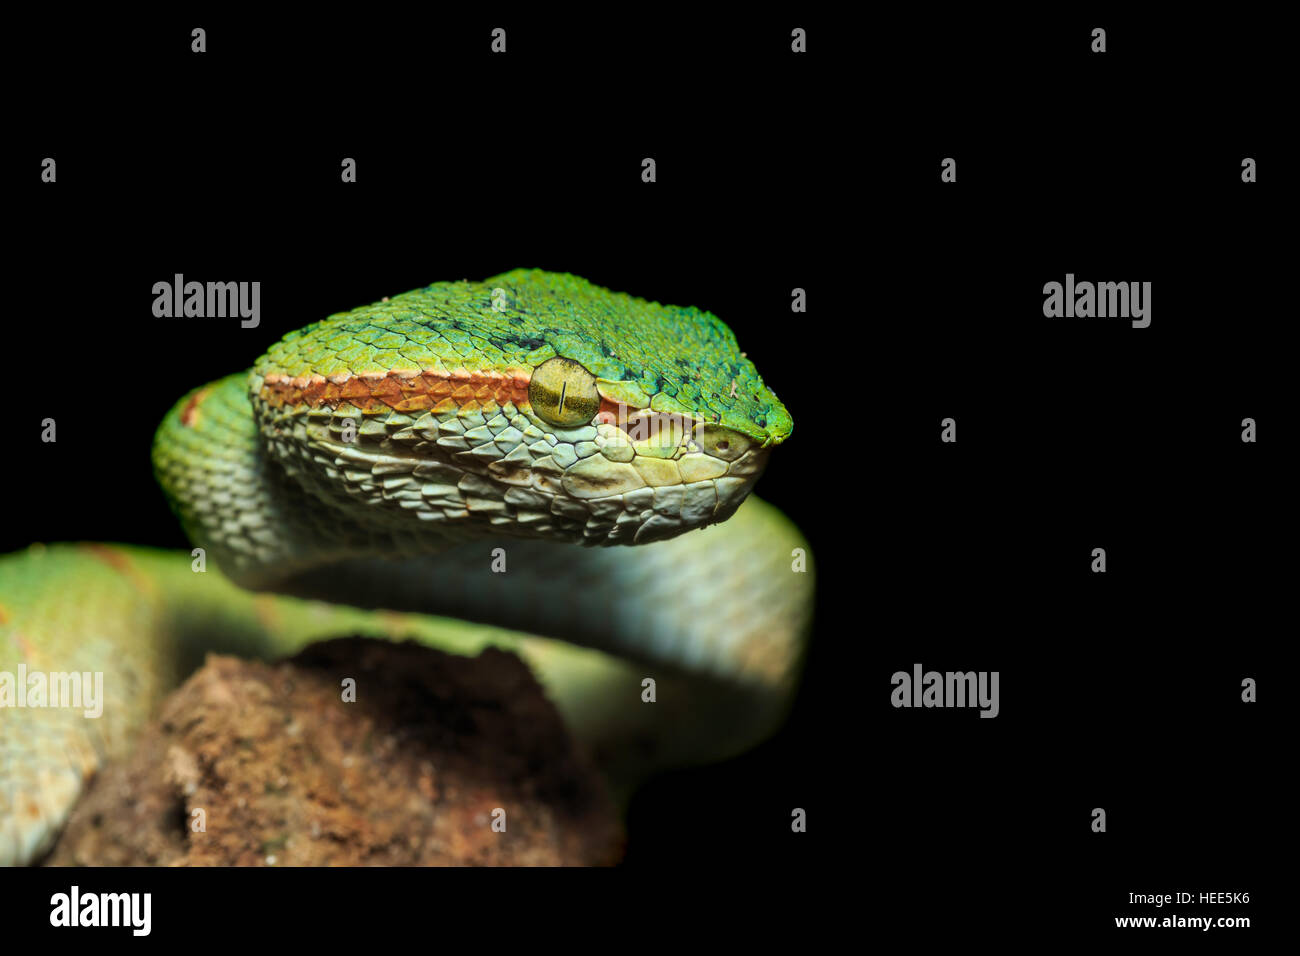 https://c8.alamy.com/comp/HEE5K6/green-snake-or-green-pit-viper-in-nature-of-thailand-isolated-on-black-HEE5K6.jpg